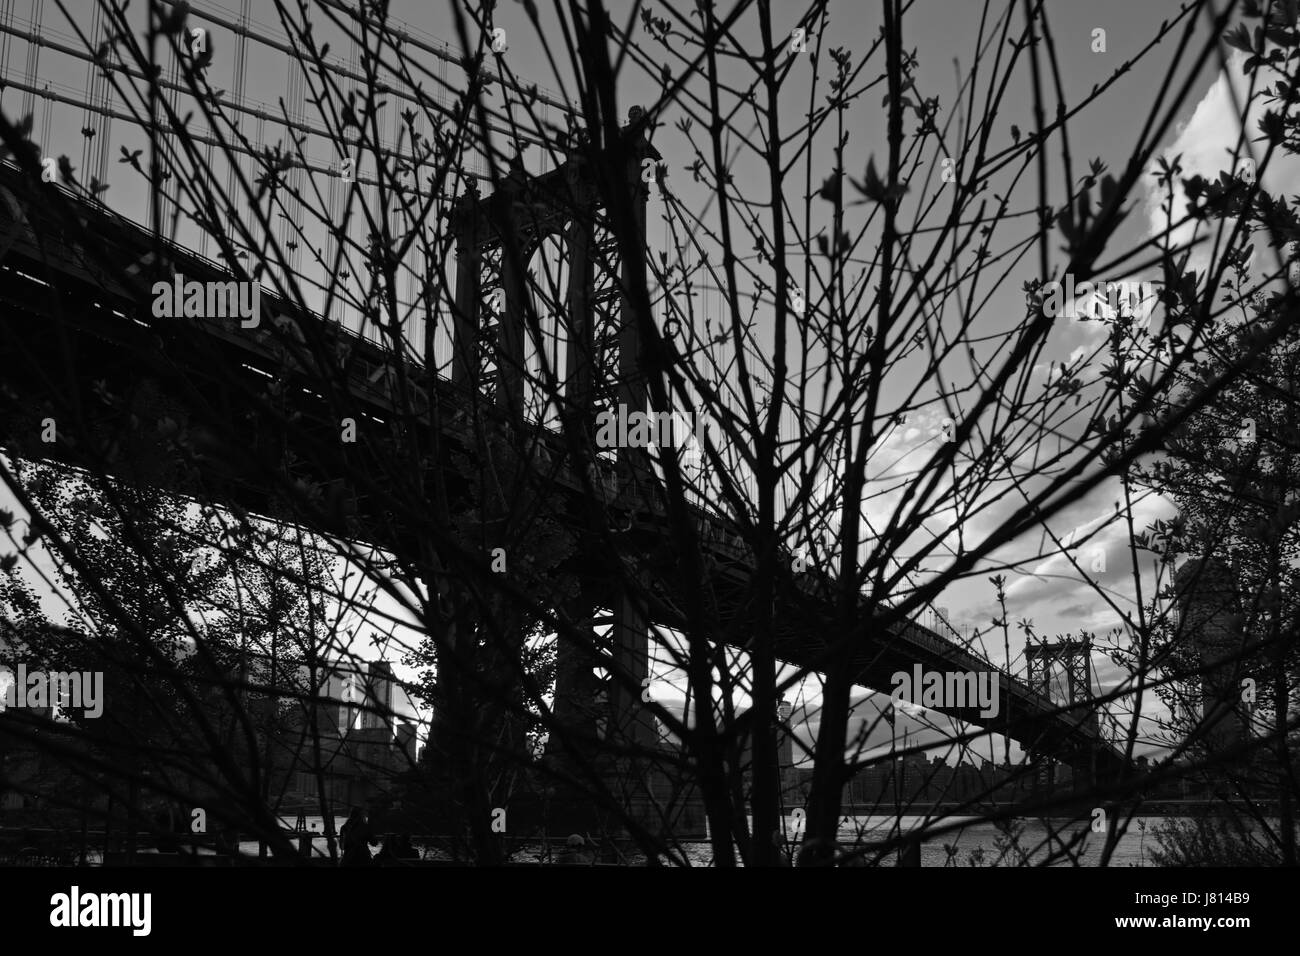 View through tree branch silhouettes across the East River of the Manhattan Bridge from DUMBO in Brooklyn, New York. City landscape on a cloudy night Stock Photo